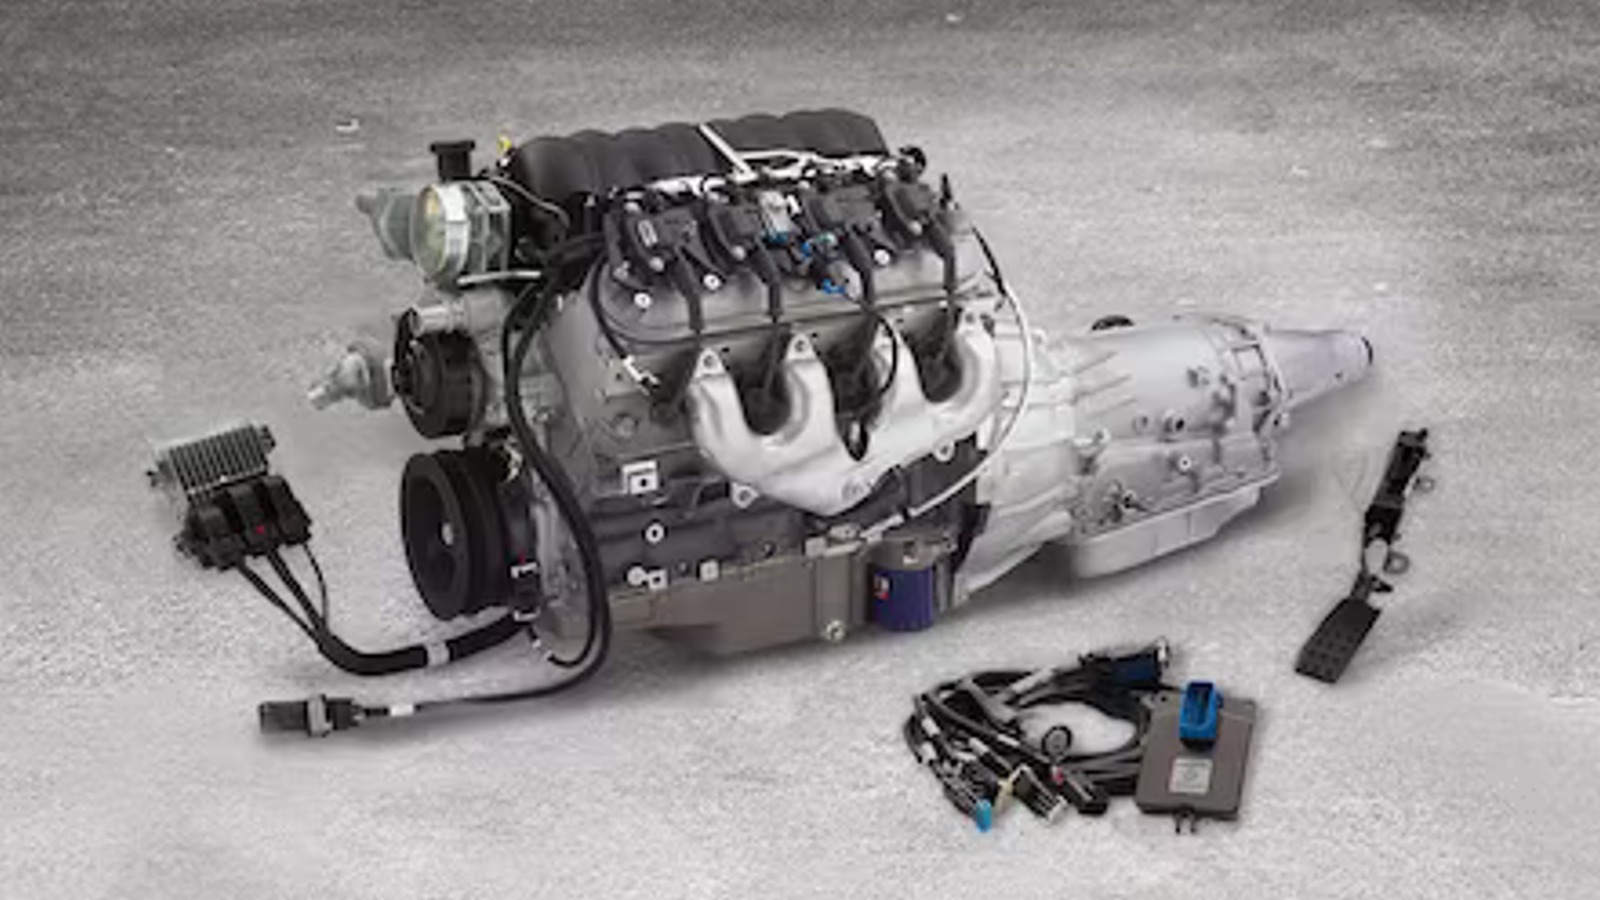 350 Chevy Vs Ford 351W: Which Is The Better Engine?